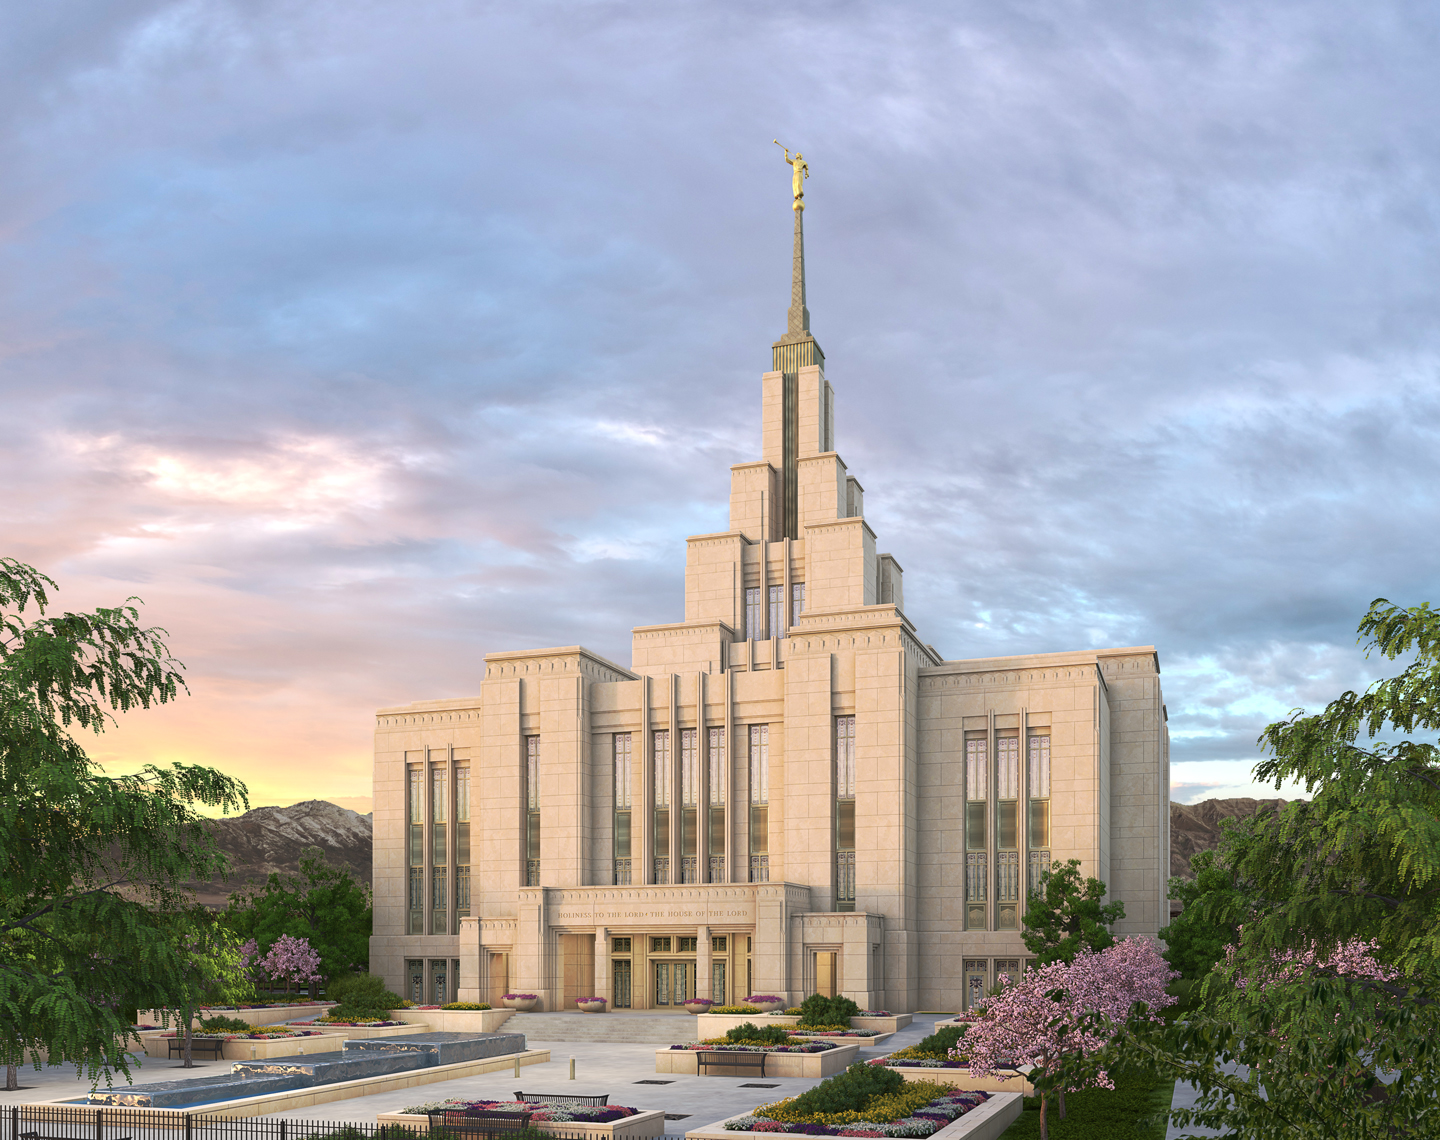 Dedication Date Announced for Latest Completed Utah Temple